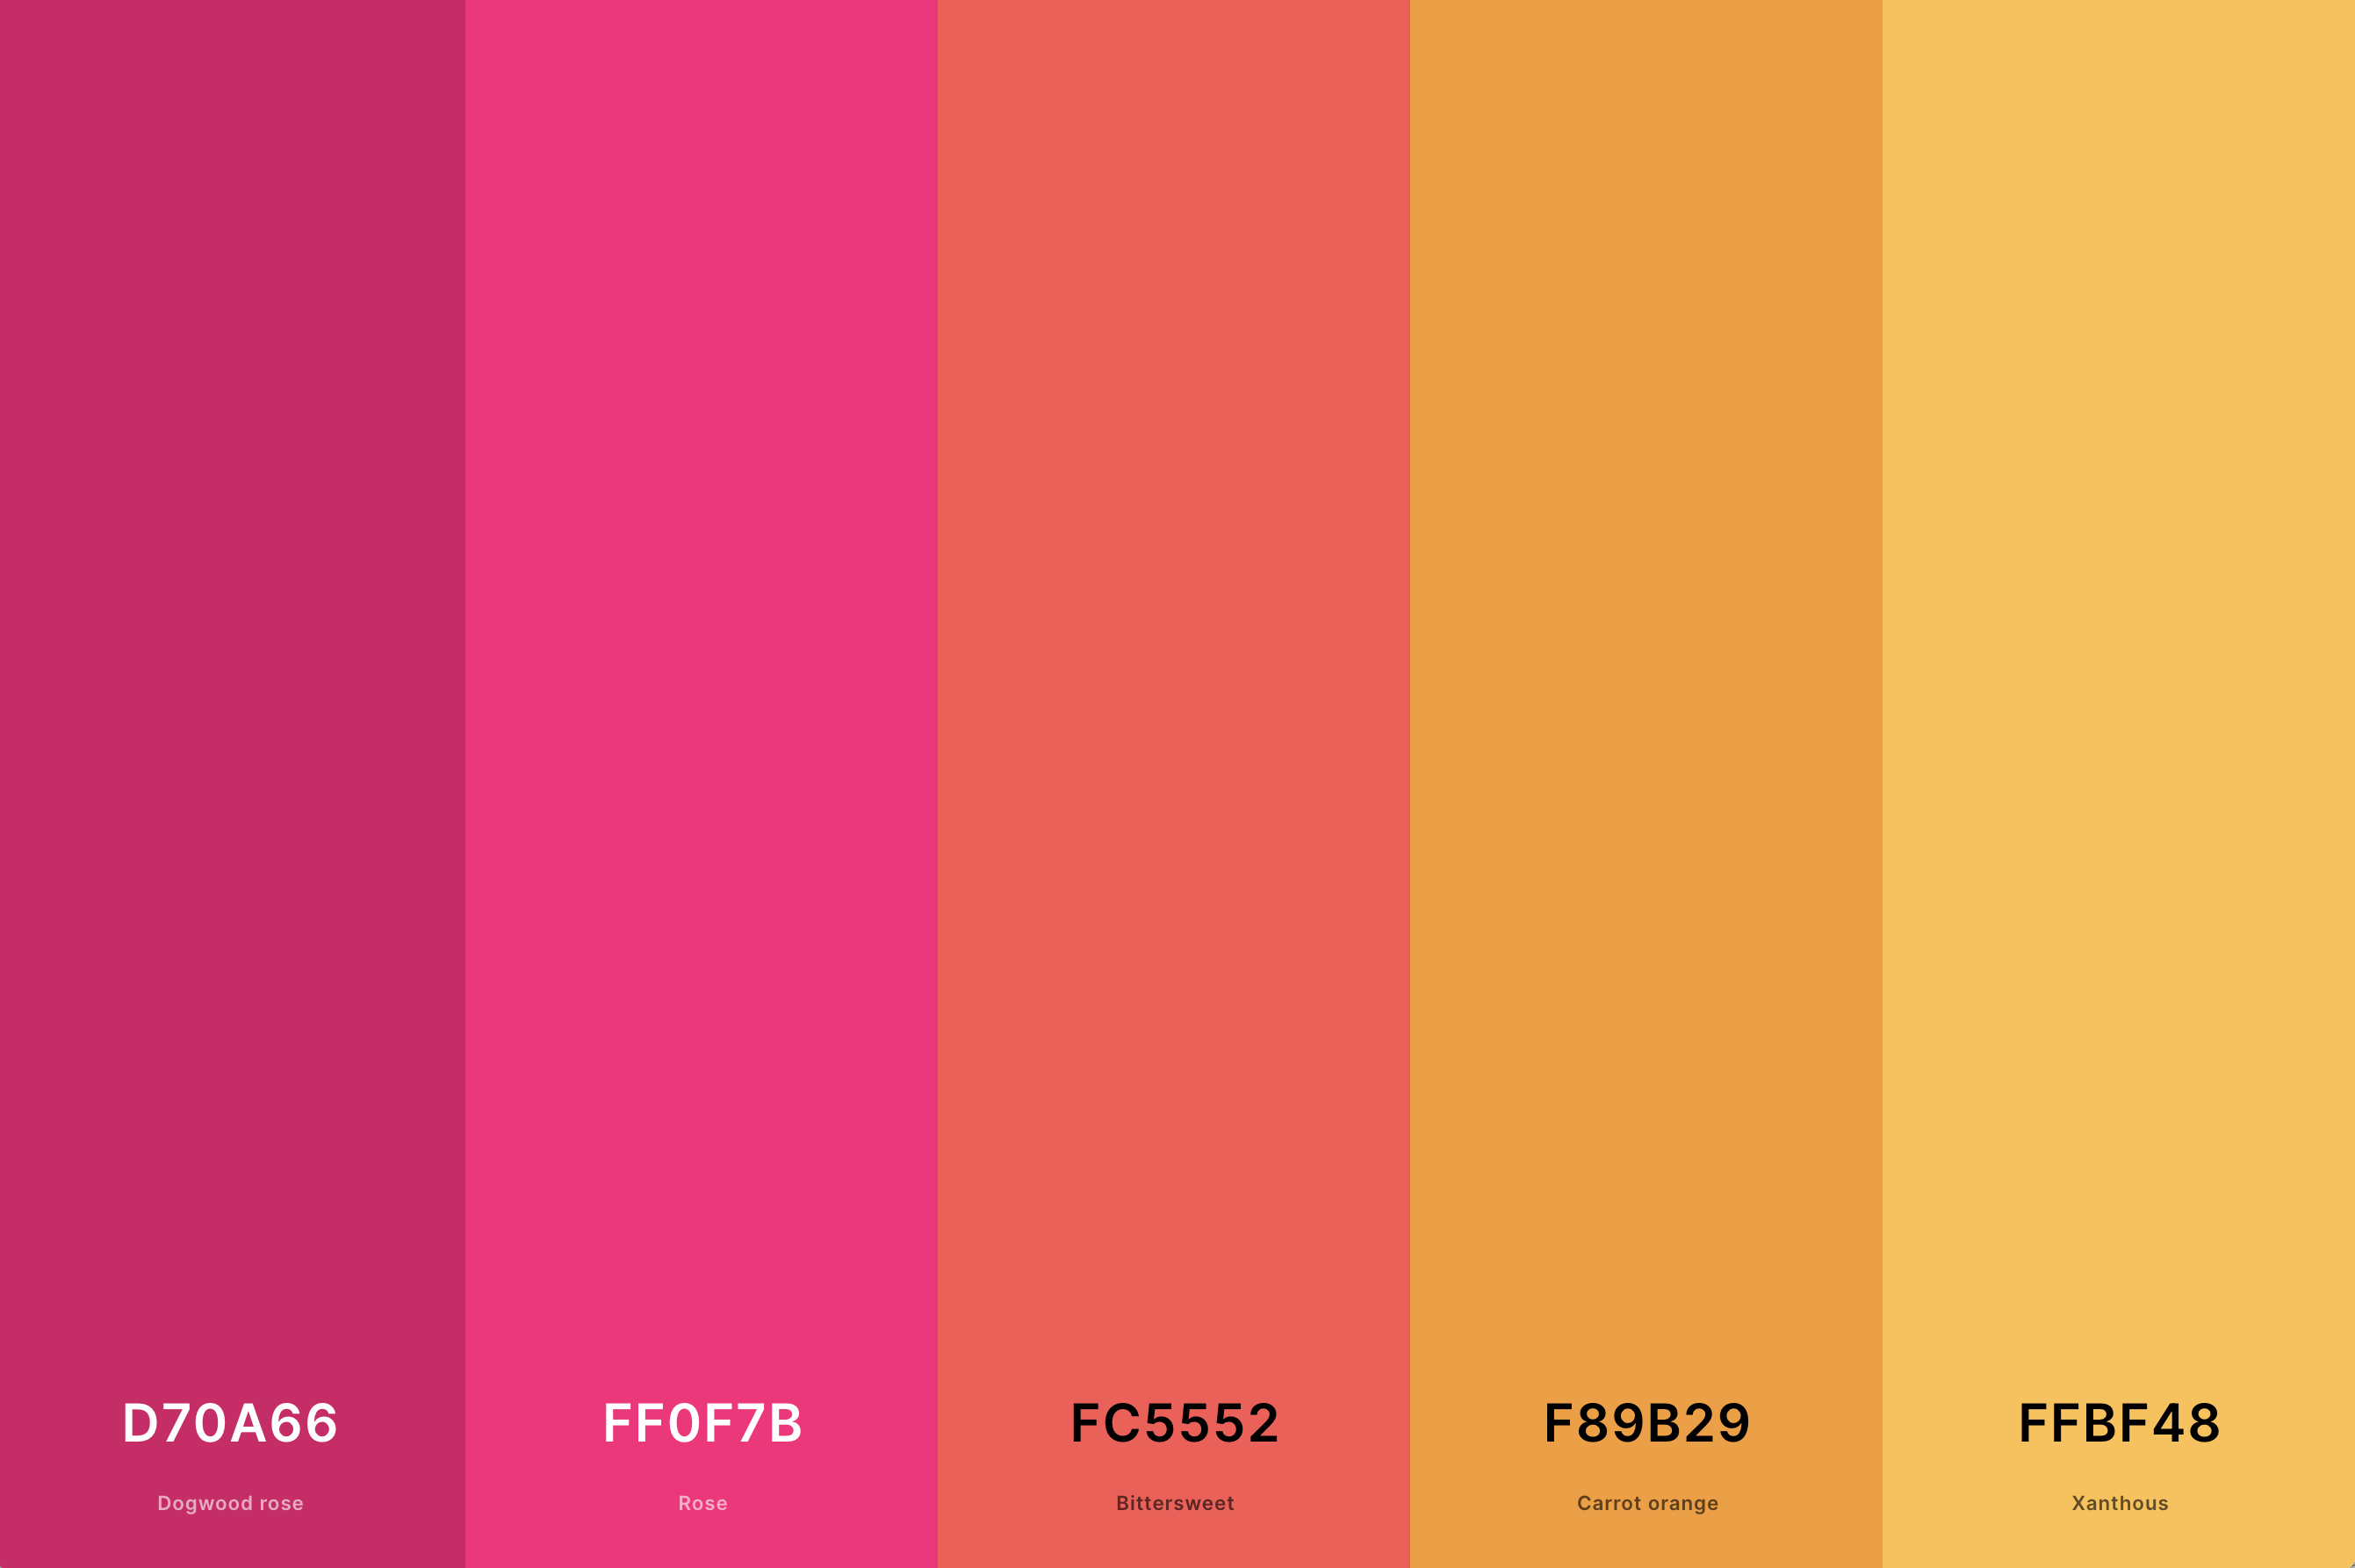 22. Orange, Yellow And Pink Color Palette Color Palette with Dogwood Rose (Hex #D70A66) + Rose (Hex #FF0F7B) + Bittersweet (Hex #FC5552) + Carrot Orange (Hex #F89B29) + Xanthous (Hex #FFBF48) Color Palette with Hex Codes